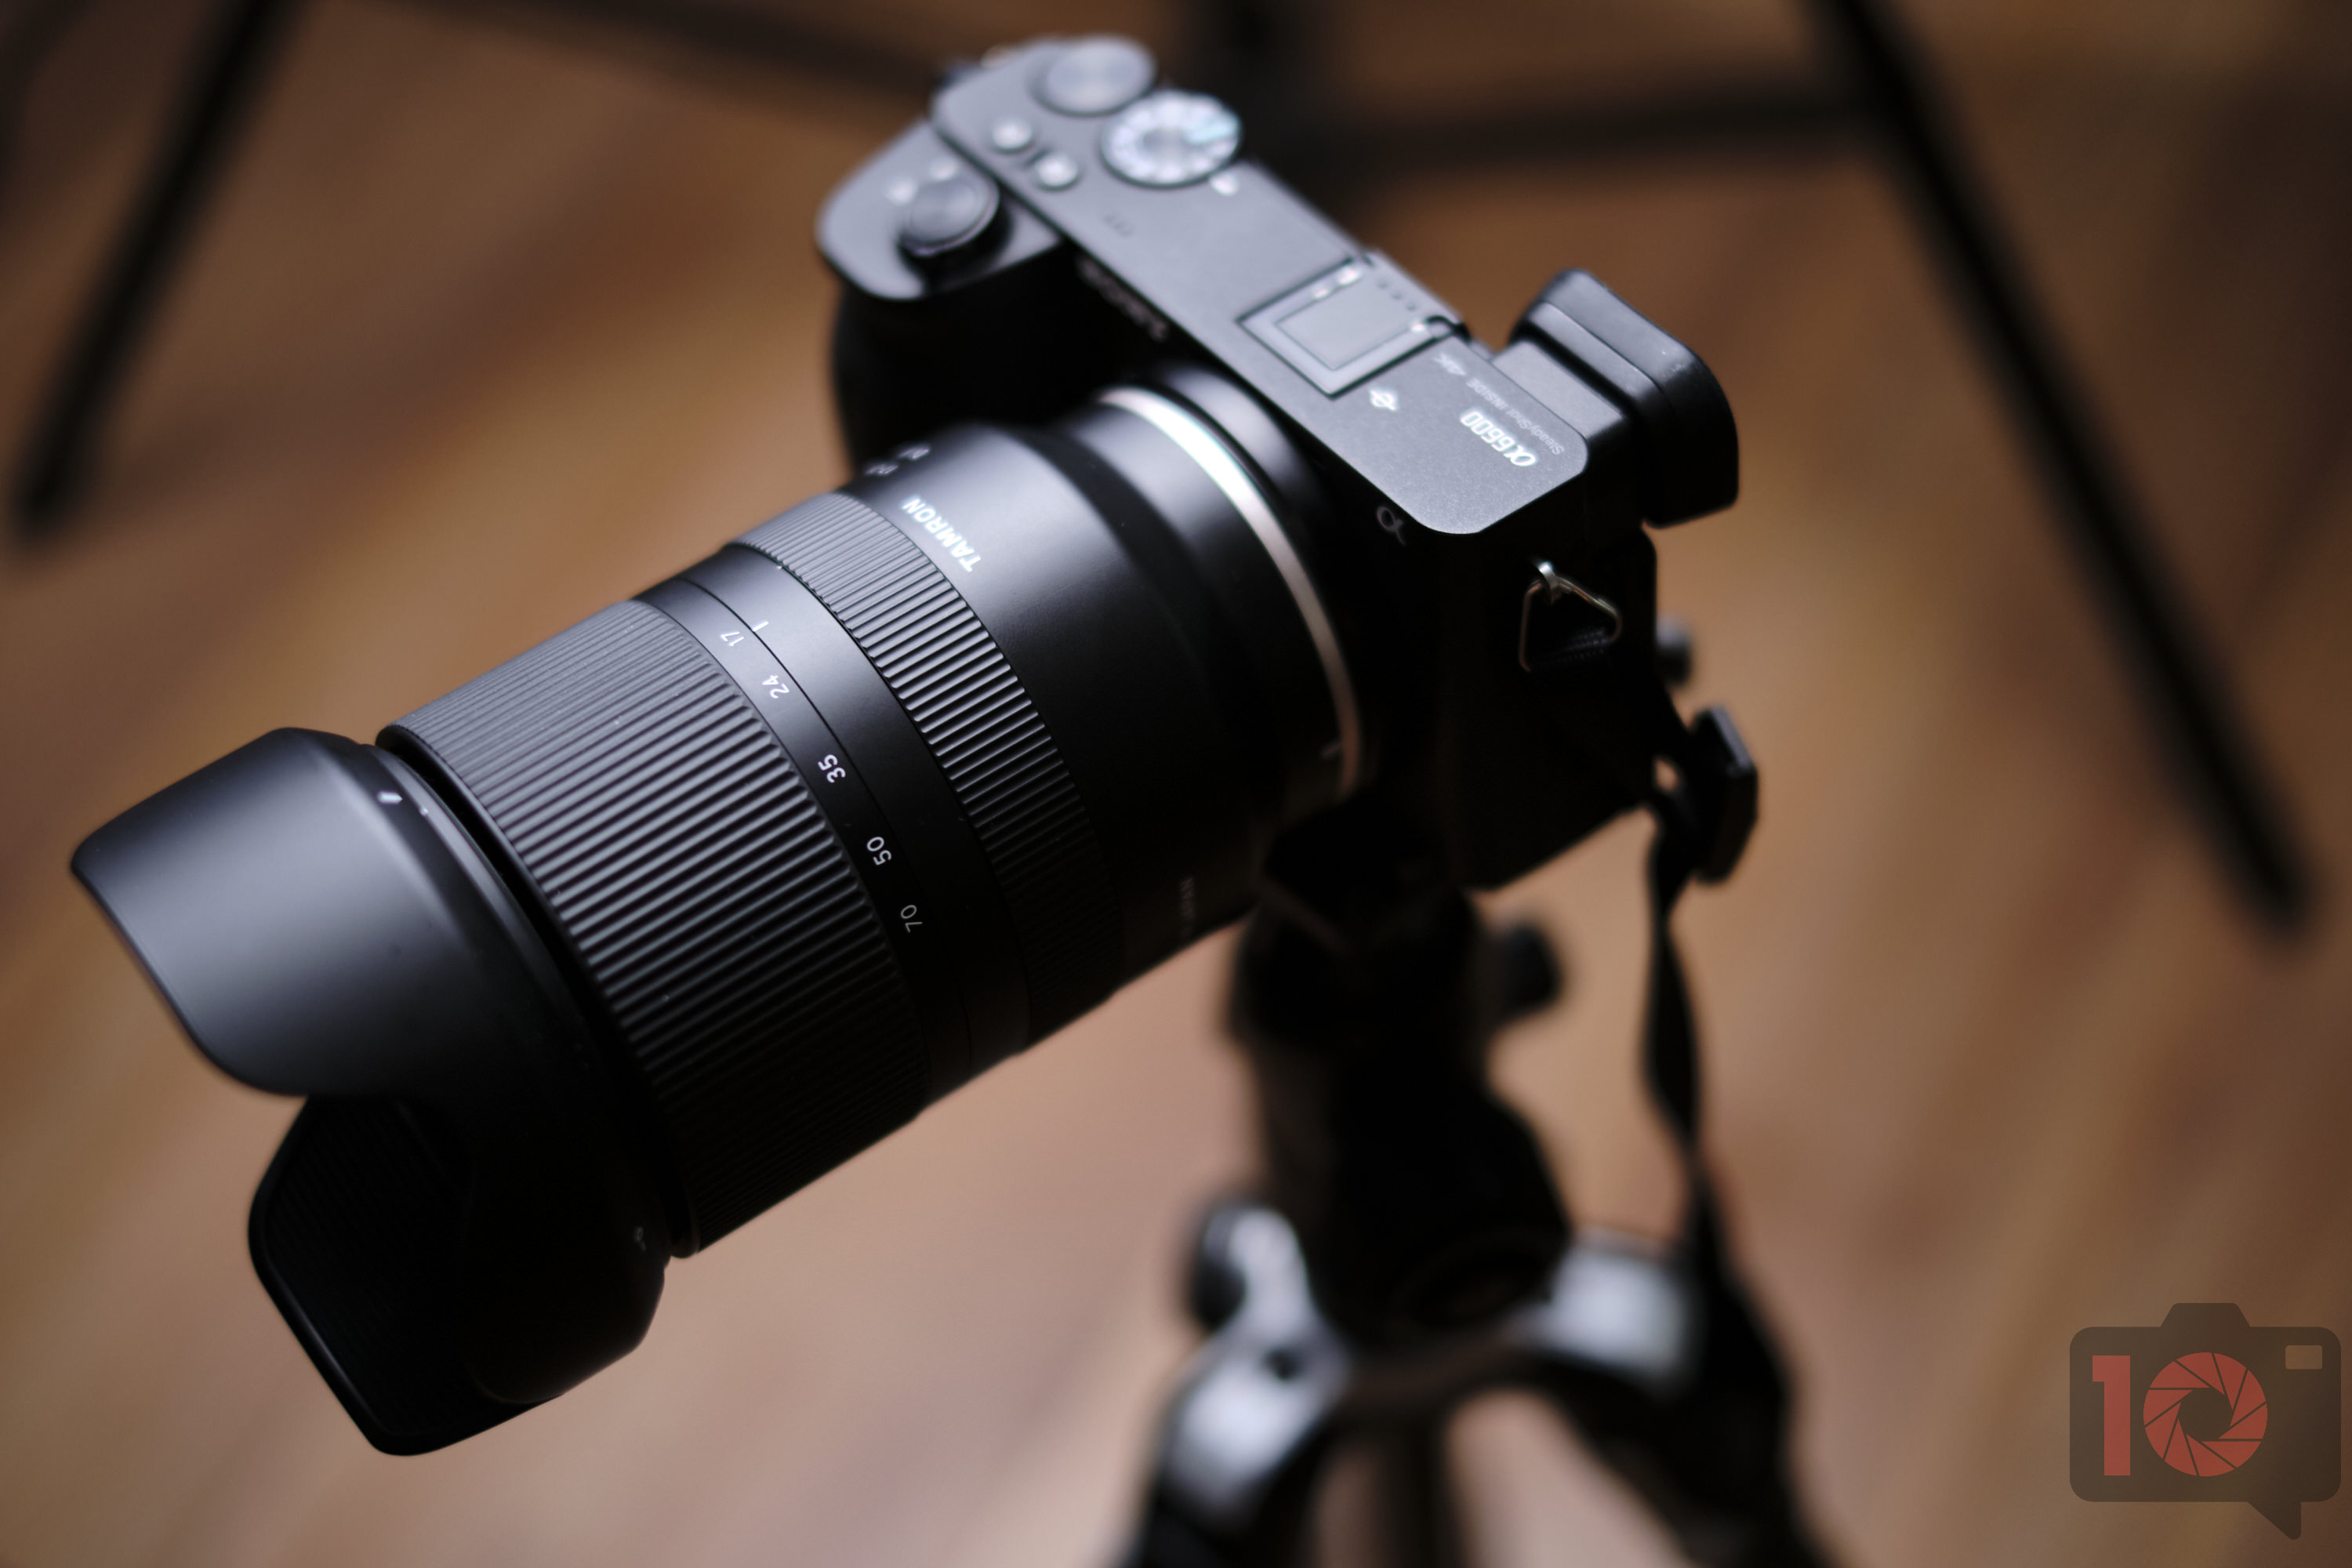 Chris Gampat The Phoblographer Tamron 17-70mm f2.8 Di III-A VC RXD Review product images 1.41-250s400 8